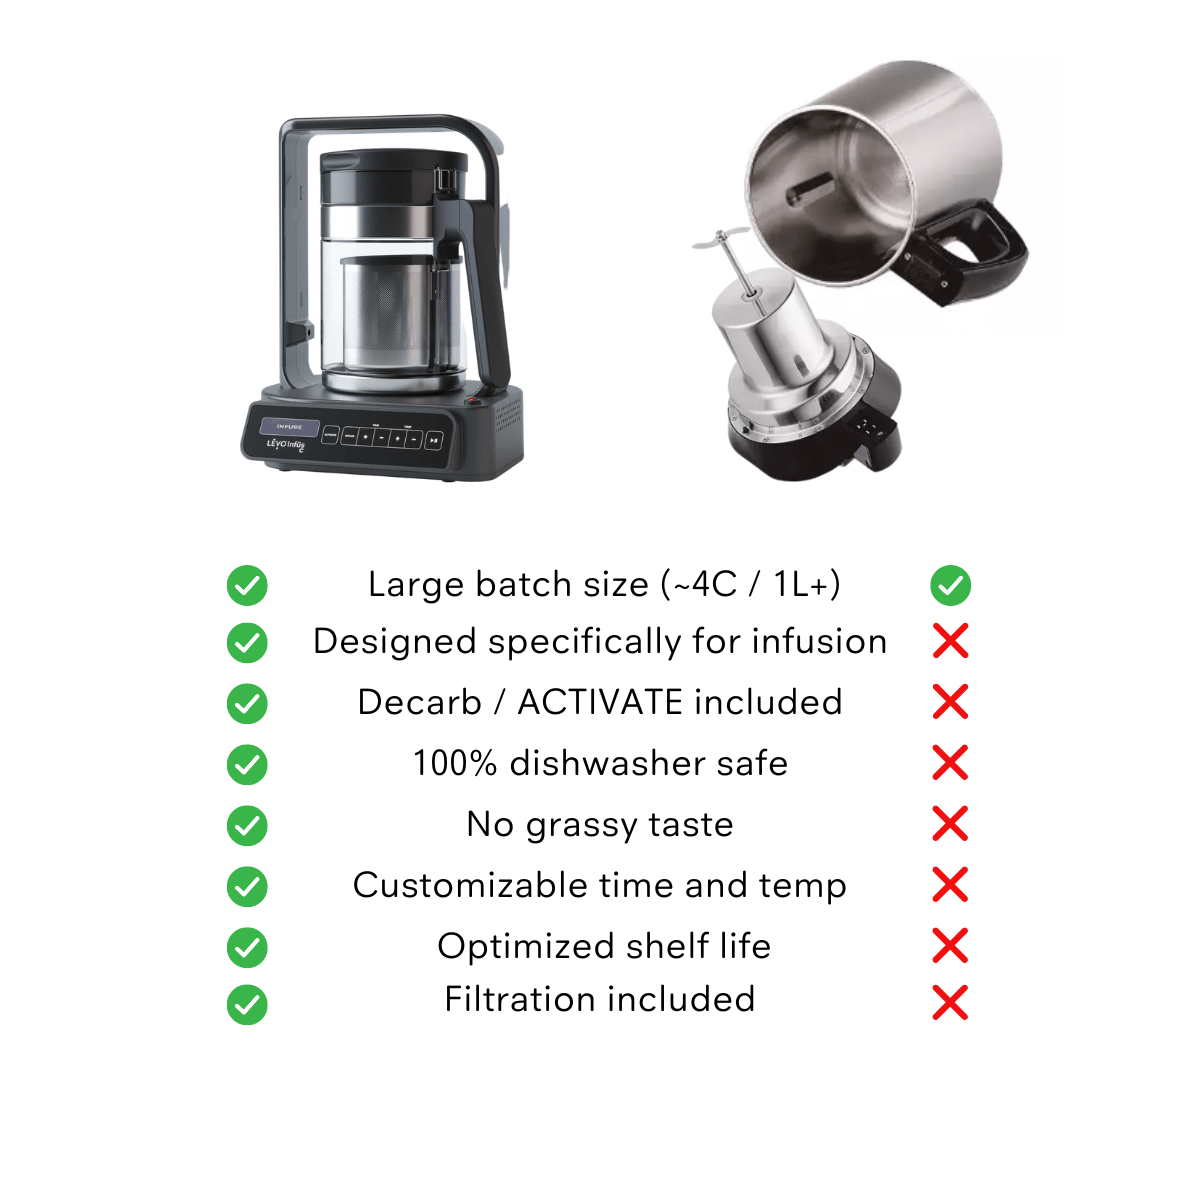 LEVO C comparison with other brands. Effortless Infusion at Scale - LĒVO C makes large-batch infusing a breeze. LĒVO C large-batch infusion machine with 1 liter glass basin.